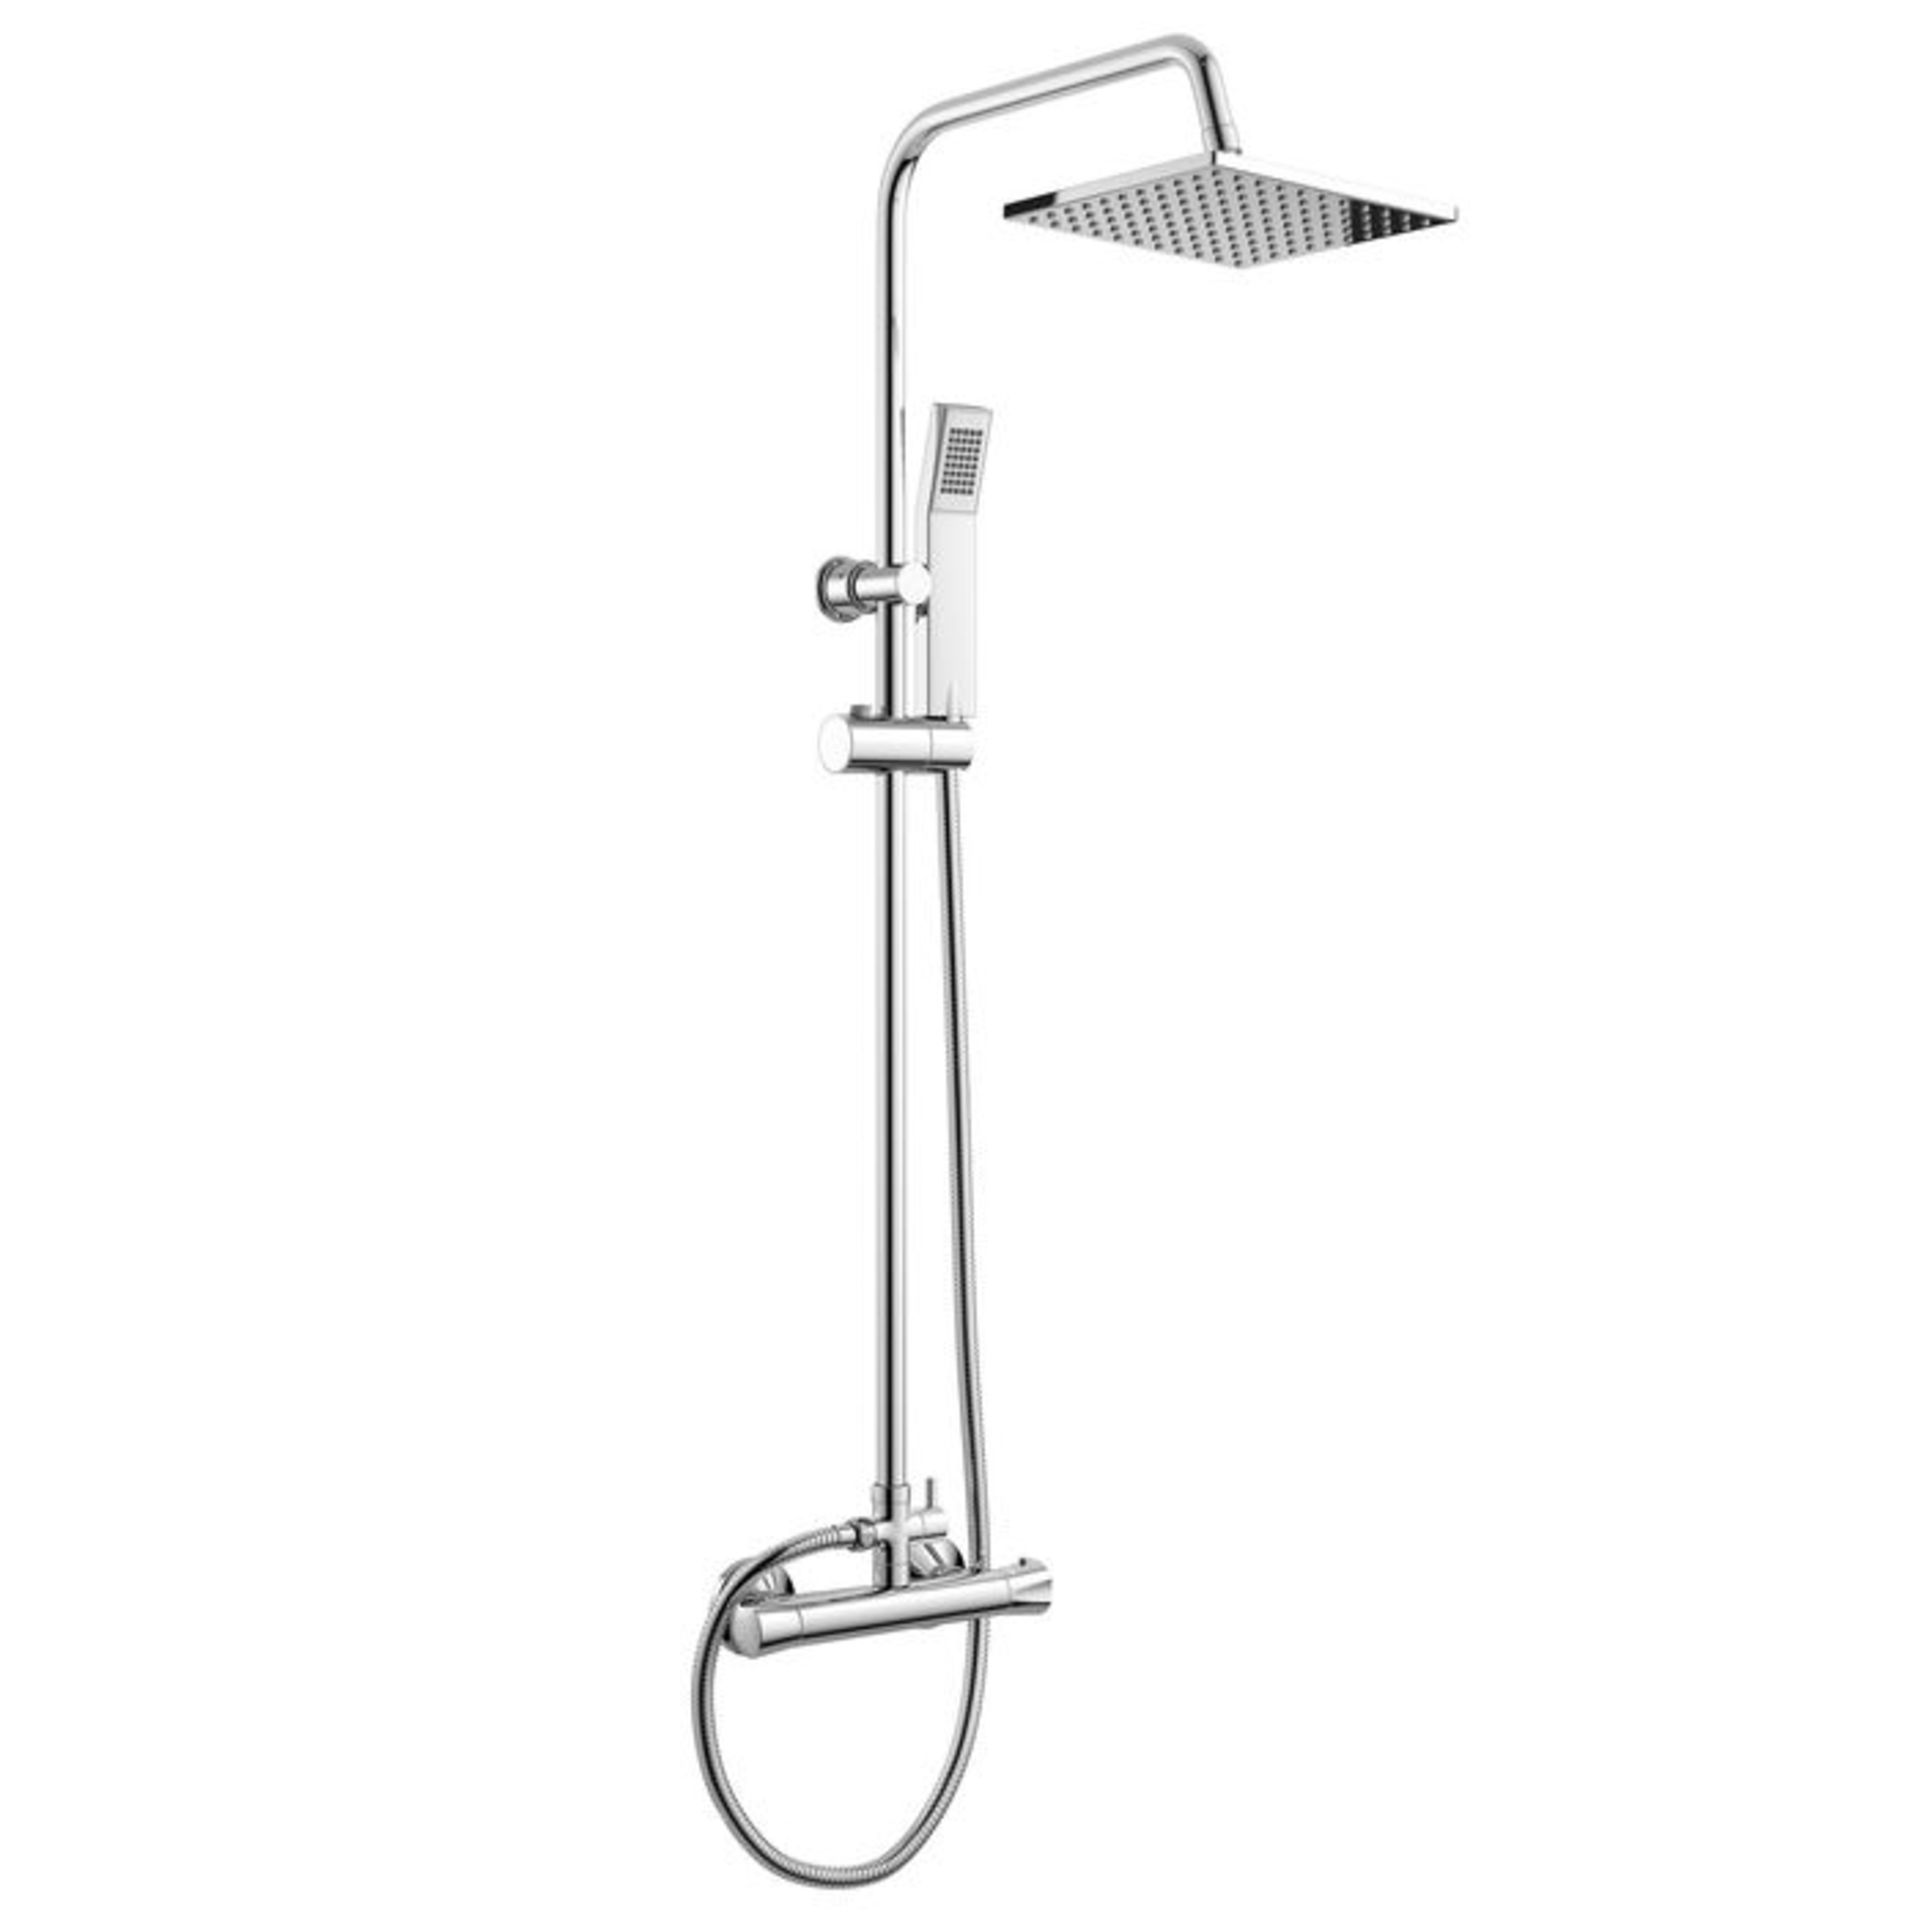 (CT155) Square Exposed Thermostatic Shower Kit & Head. Curved features and contemporary rounded